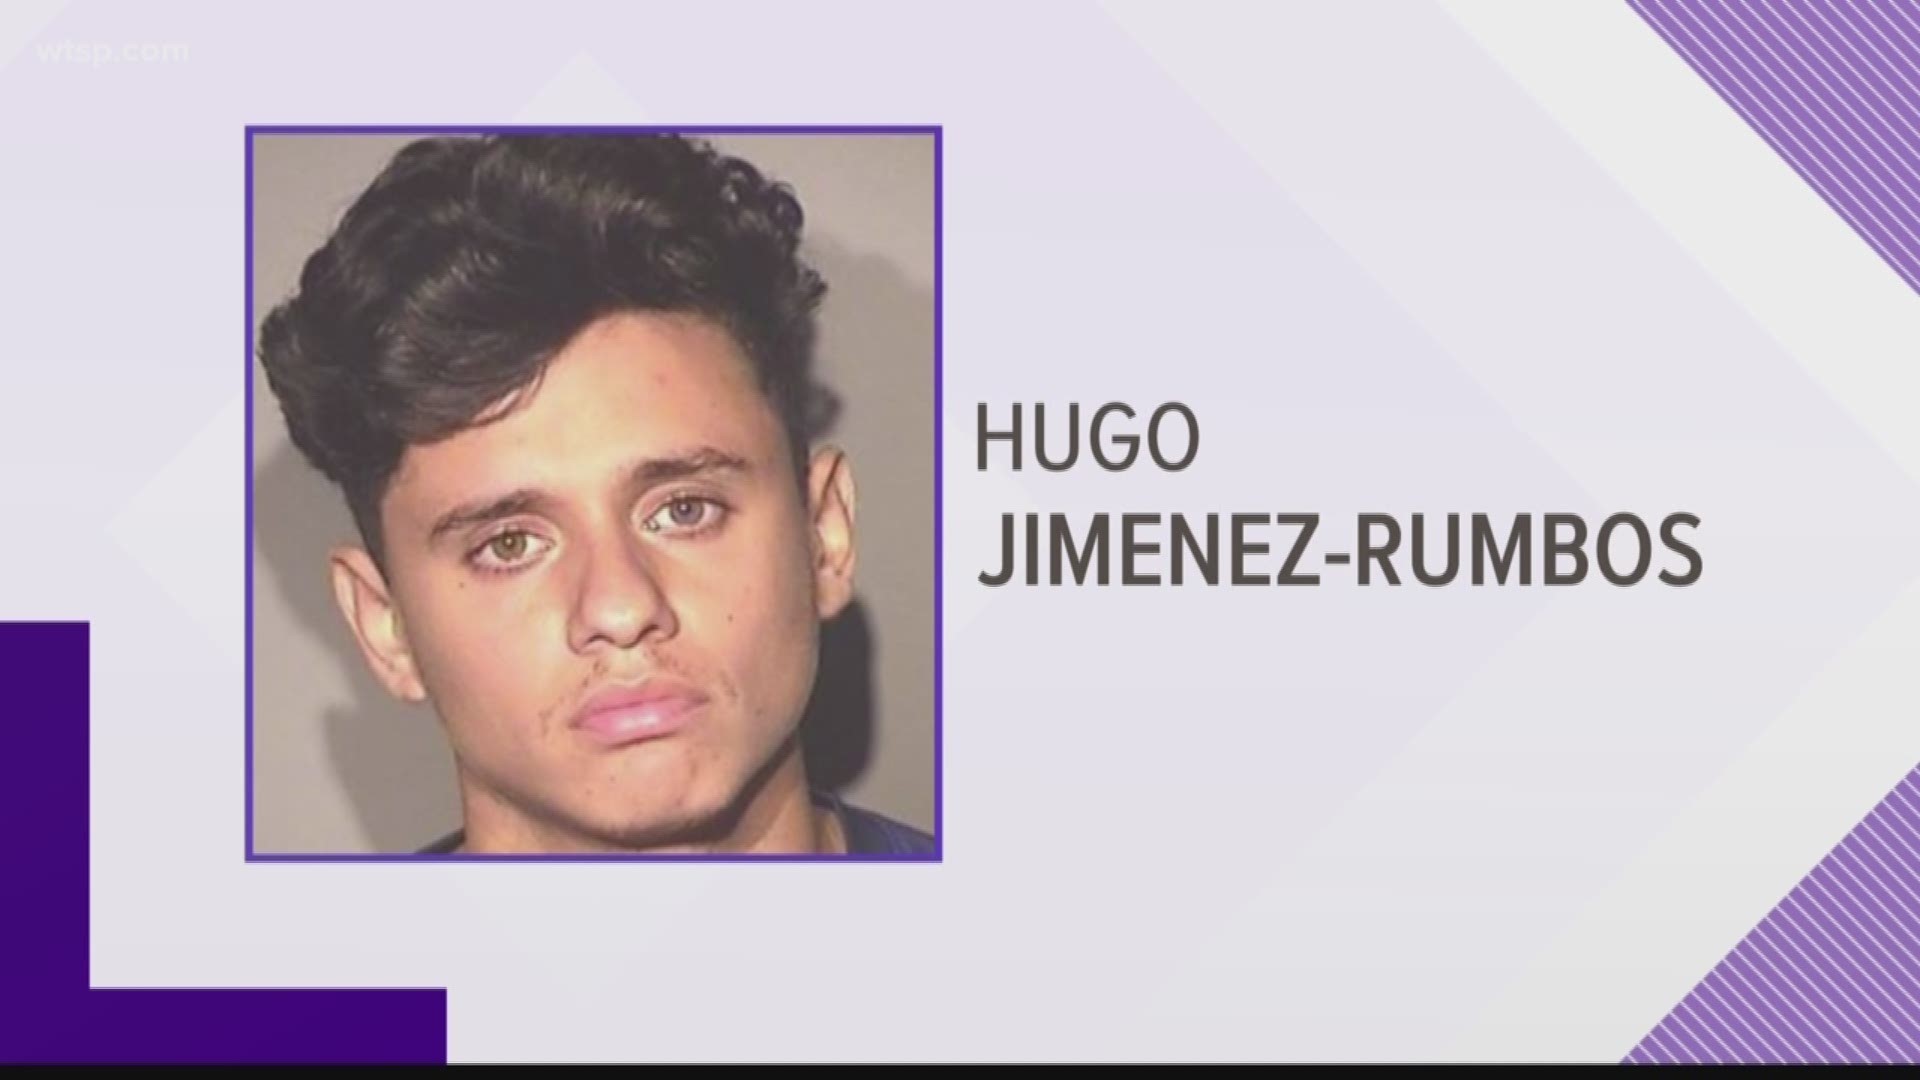 A soccer coach in Florida is facing accusations he molested a 9-year-old boy before and during practice.

Authorities say 22-year-old Hugo Daniel Jimenez-Rumbos picked the boy up at his Orlando home to take him to a sporting goods store to buy knee pads before heading to a soccer field.